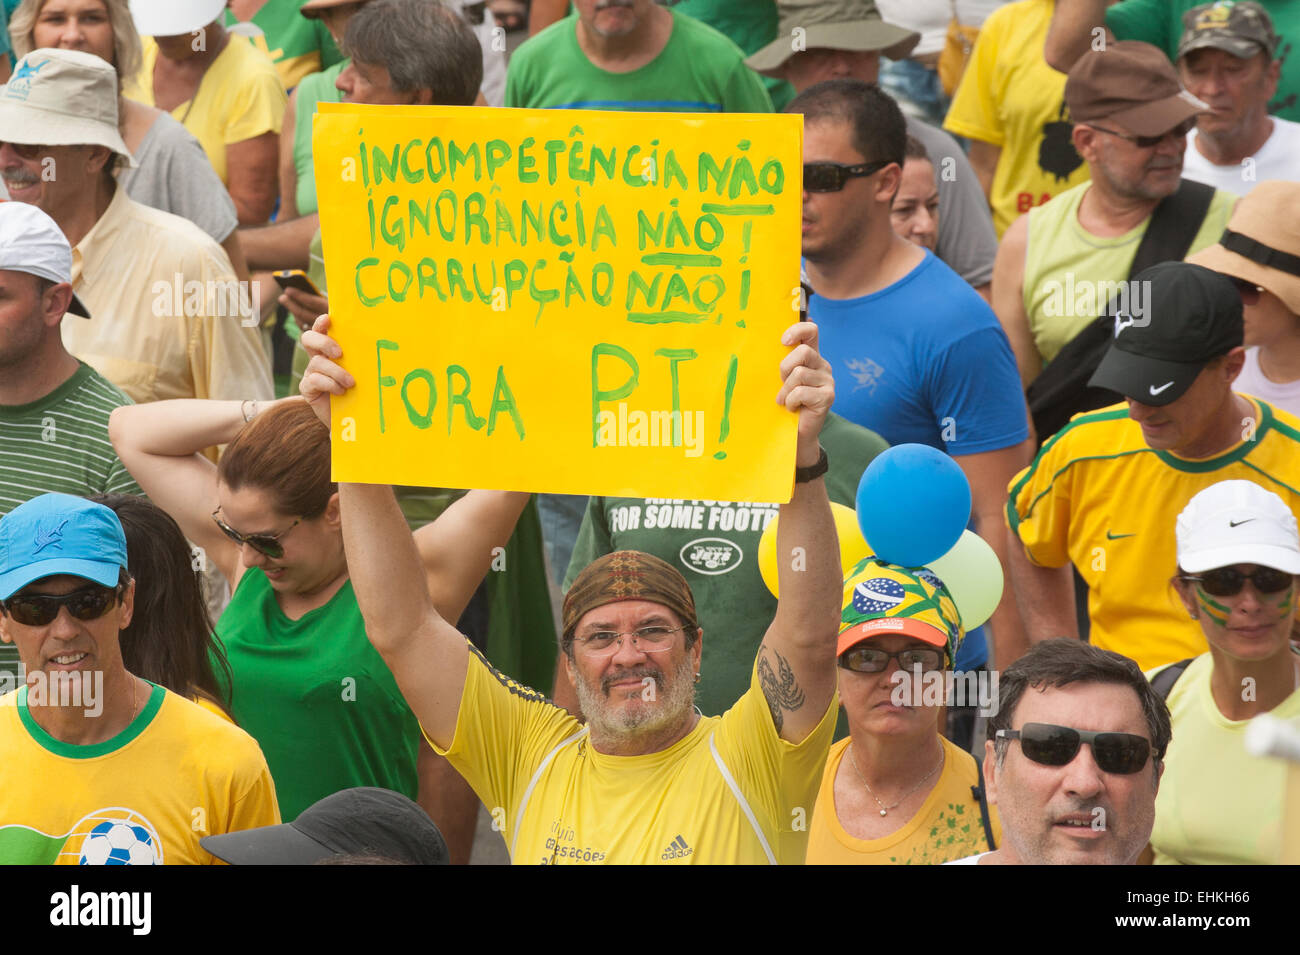 A protester carries a hand-written placard 'Incometence No, Ignorance No, Corruption No, PT [Workers' Party] Out'. Rio de Janeiro, Brazil, 15th March 2015. Popular demonstration against the President, Dilma Rousseff in Copacabana. Photo © Sue Cunningham sue@scphotographic.com. Stock Photo